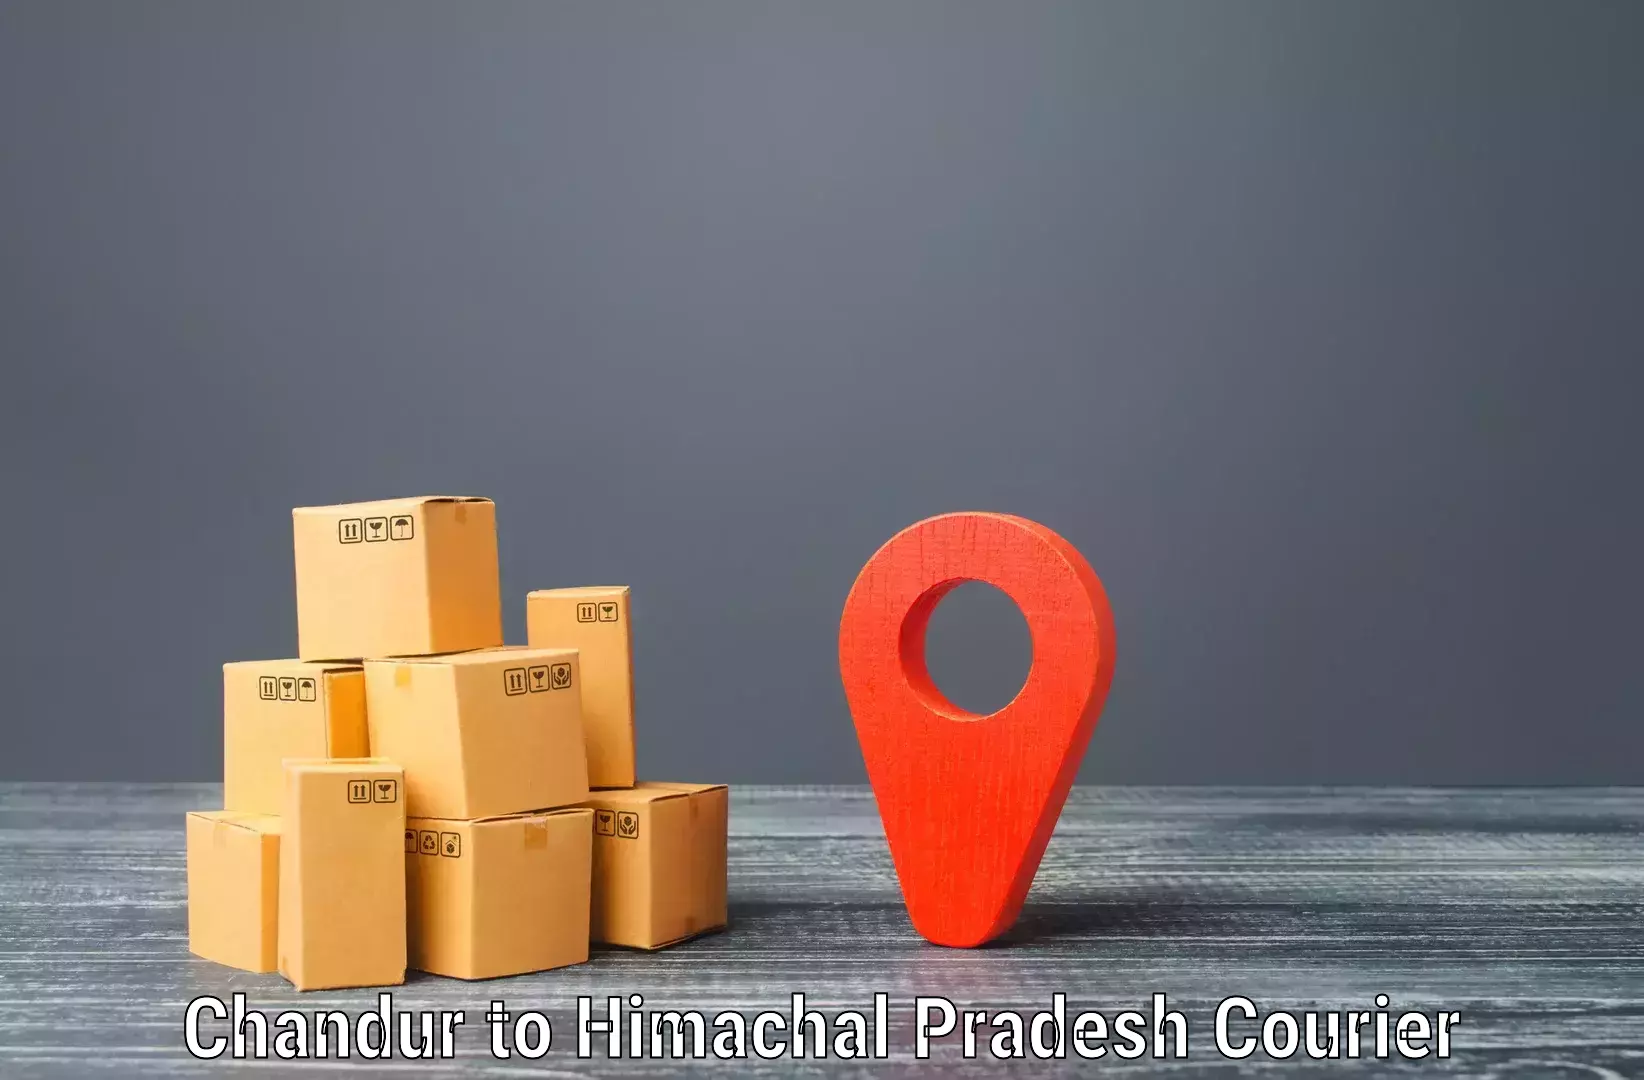 Bulk courier orders Chandur to Chachyot